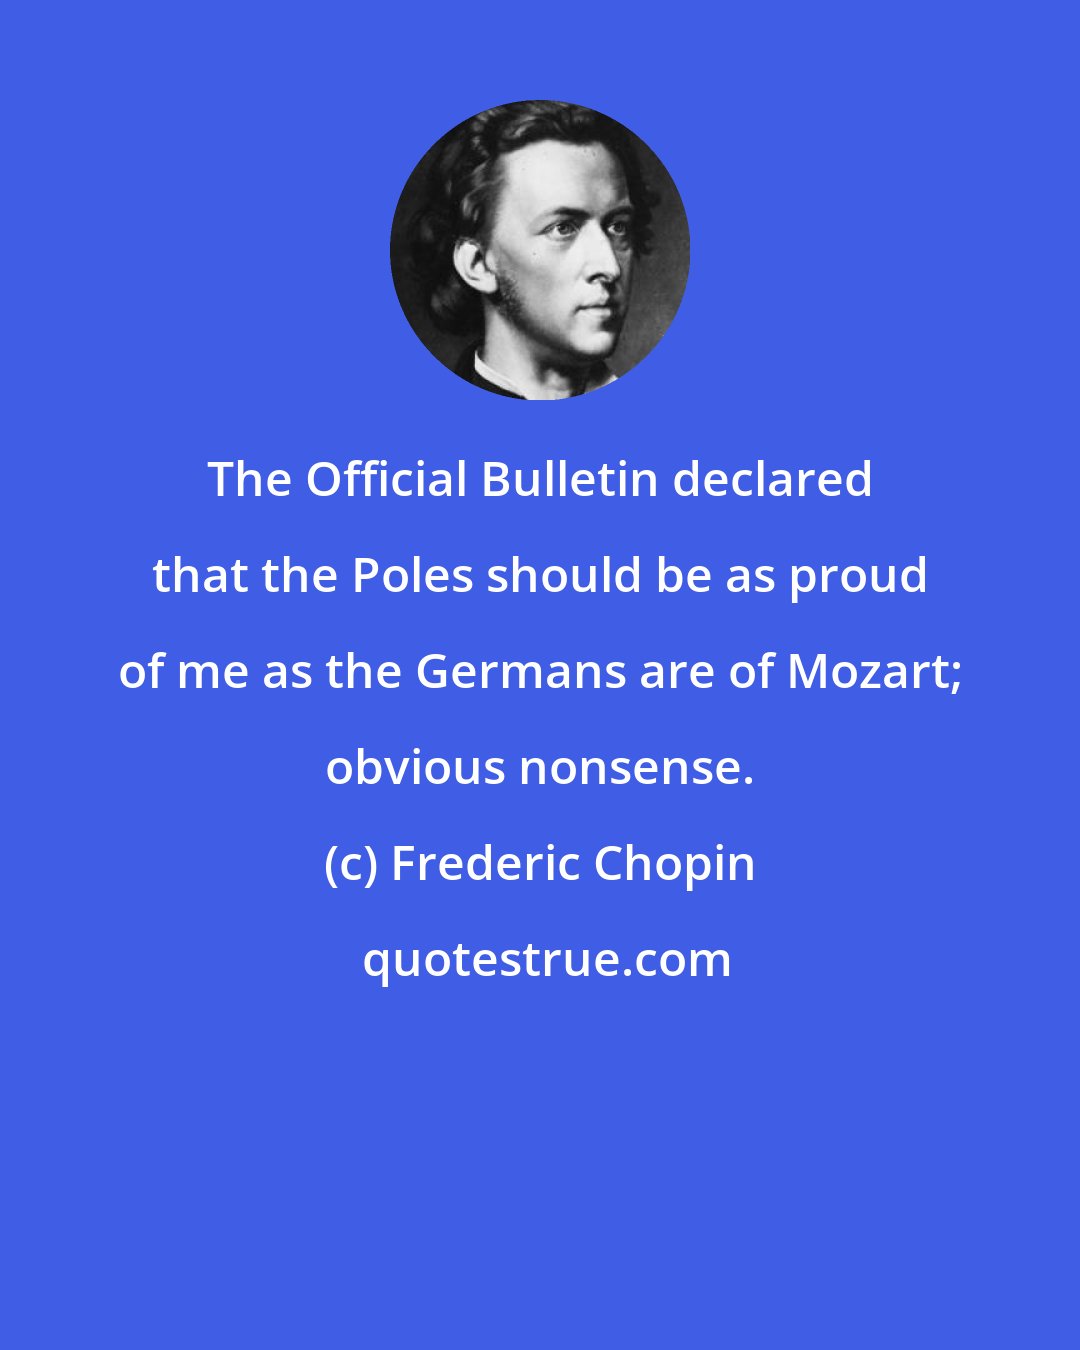 Frederic Chopin: The Official Bulletin declared that the Poles should be as proud of me as the Germans are of Mozart; obvious nonsense.